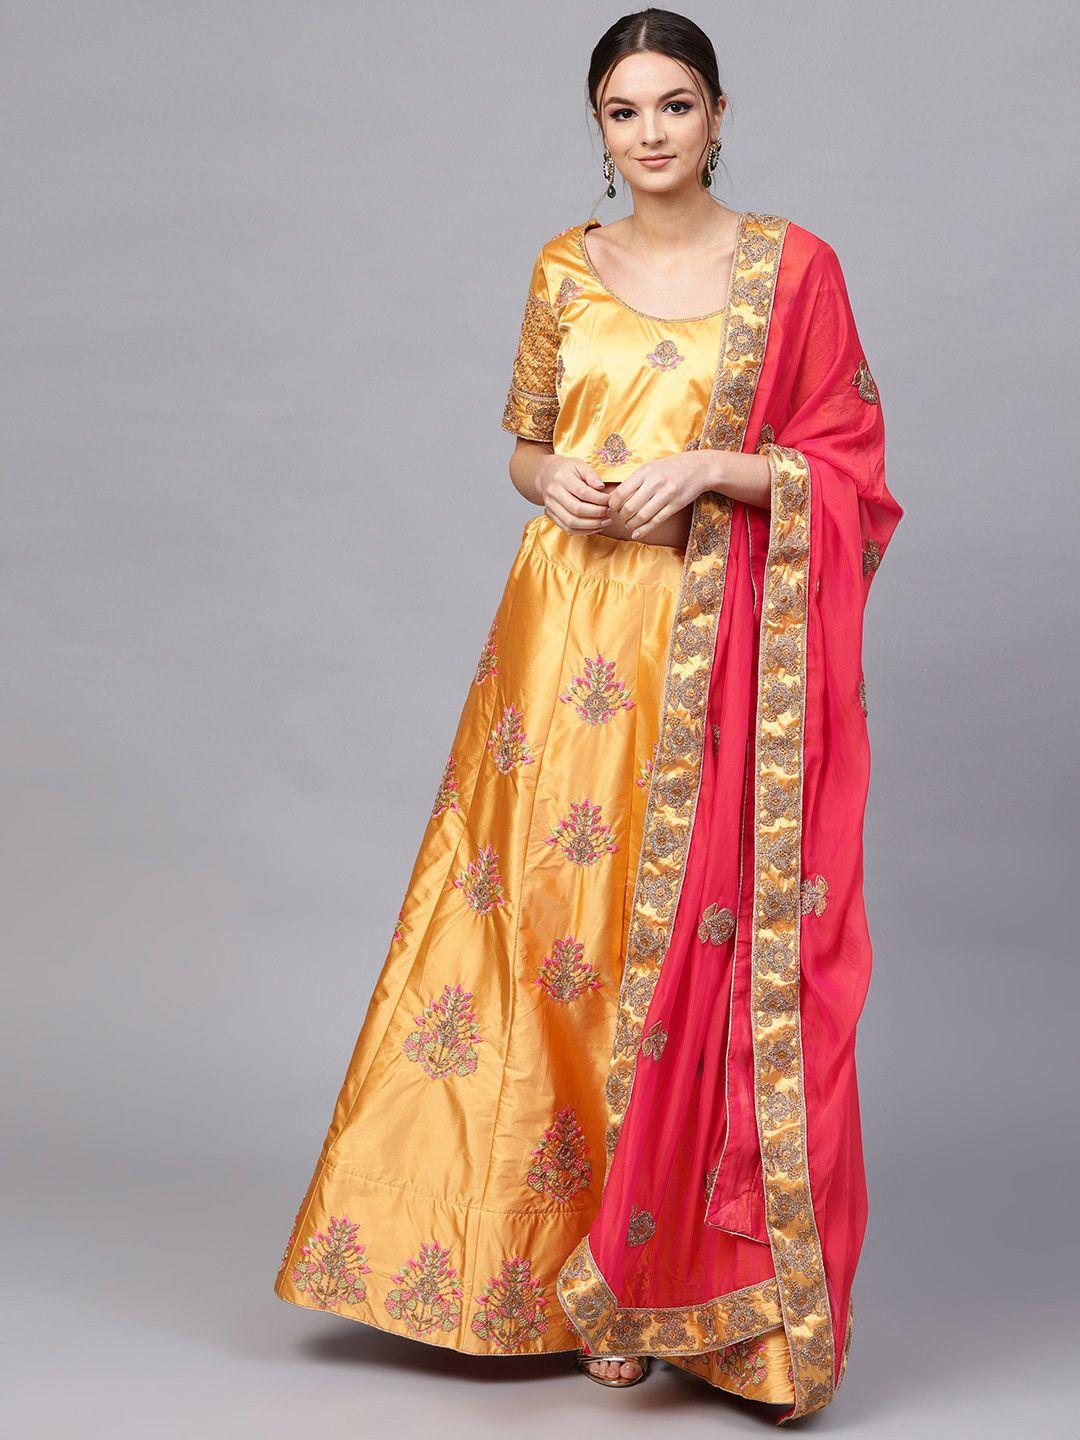 saree-mall-mustard-yellow-&-red-embroidered-ready-to-wear-lehenga-&-blouse-with-dupatta